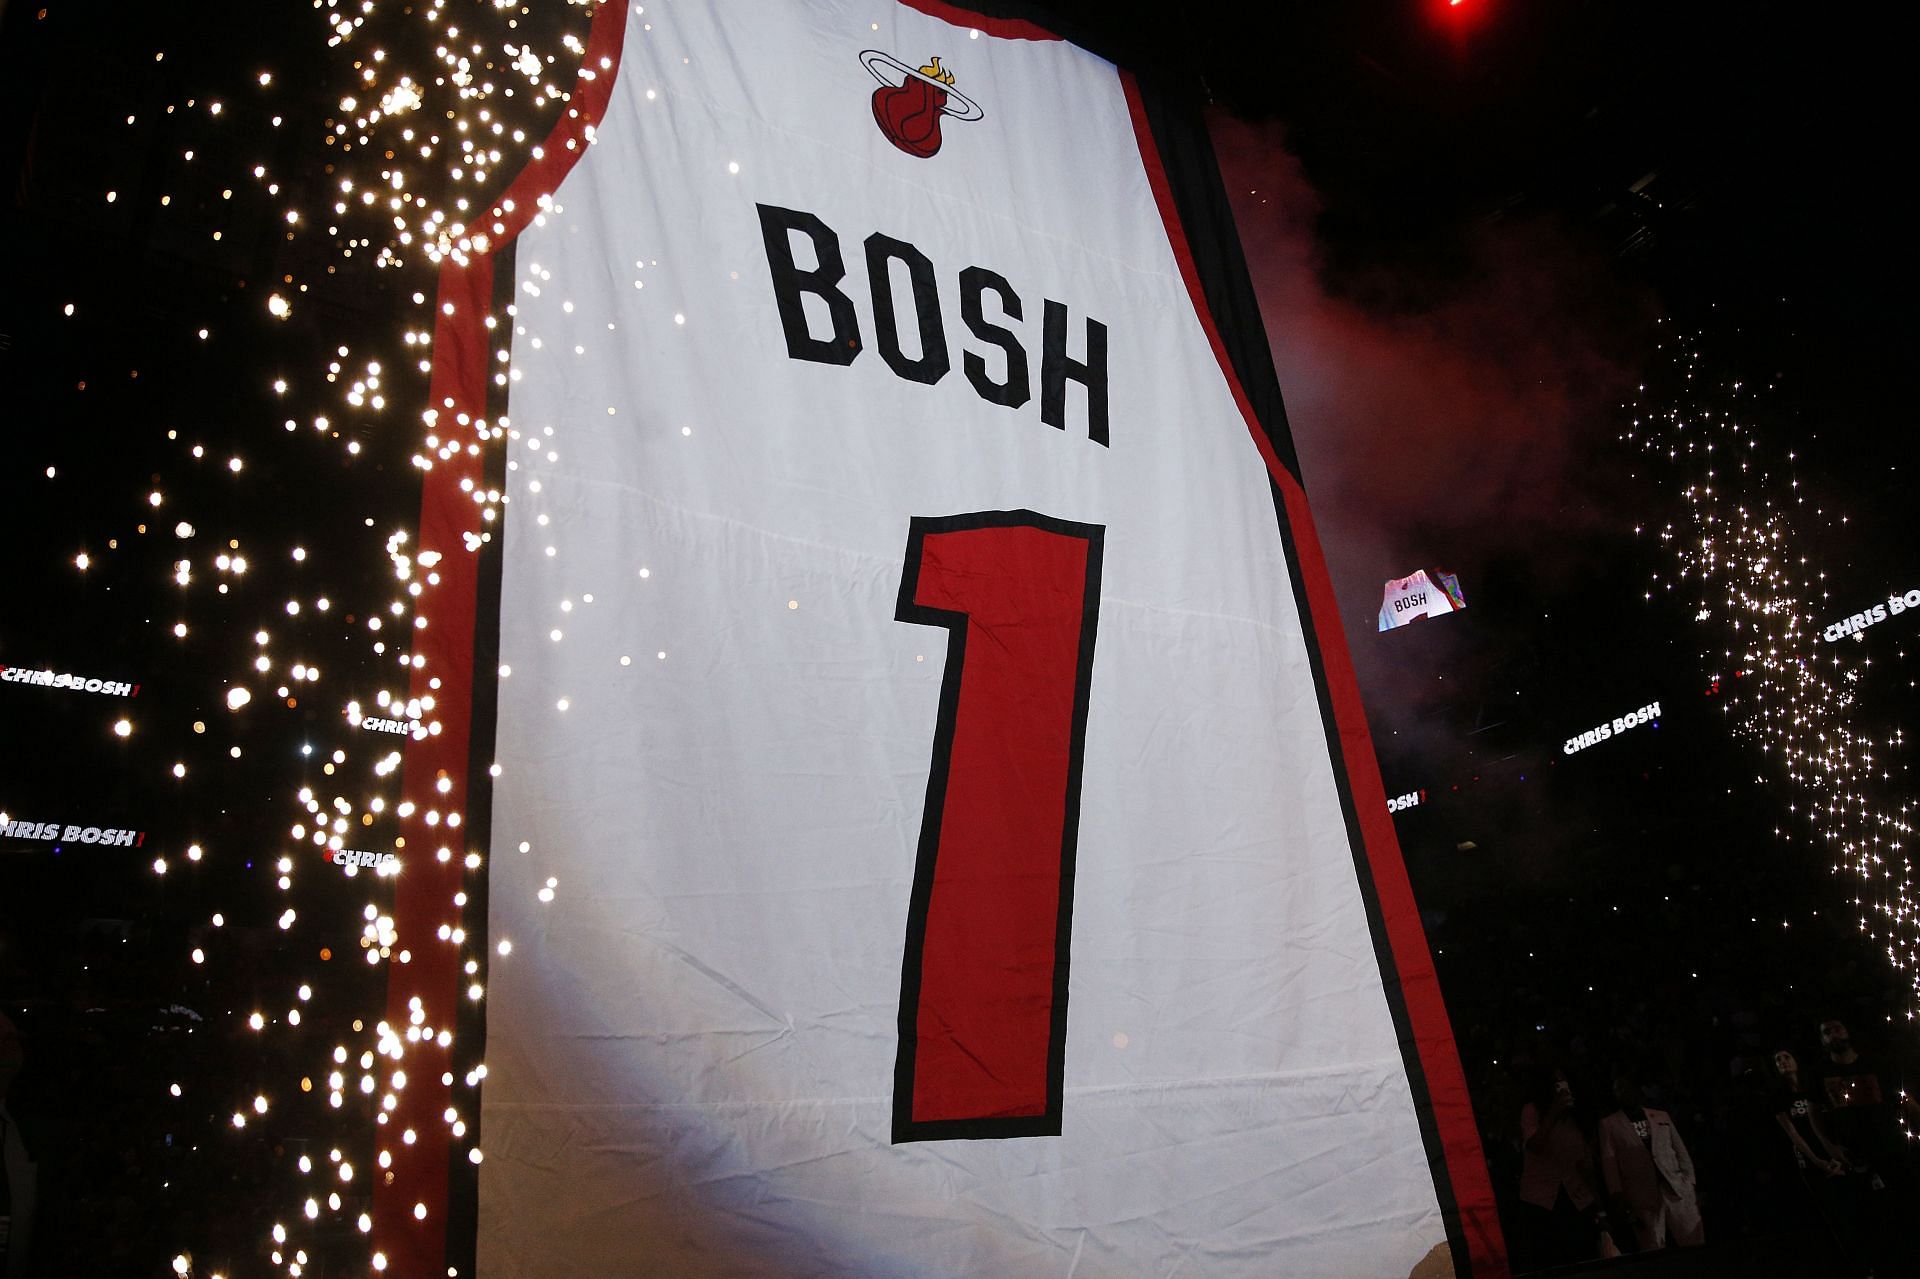 Miami Heat forward Chris Bosh had his jersey raised to the rafters.